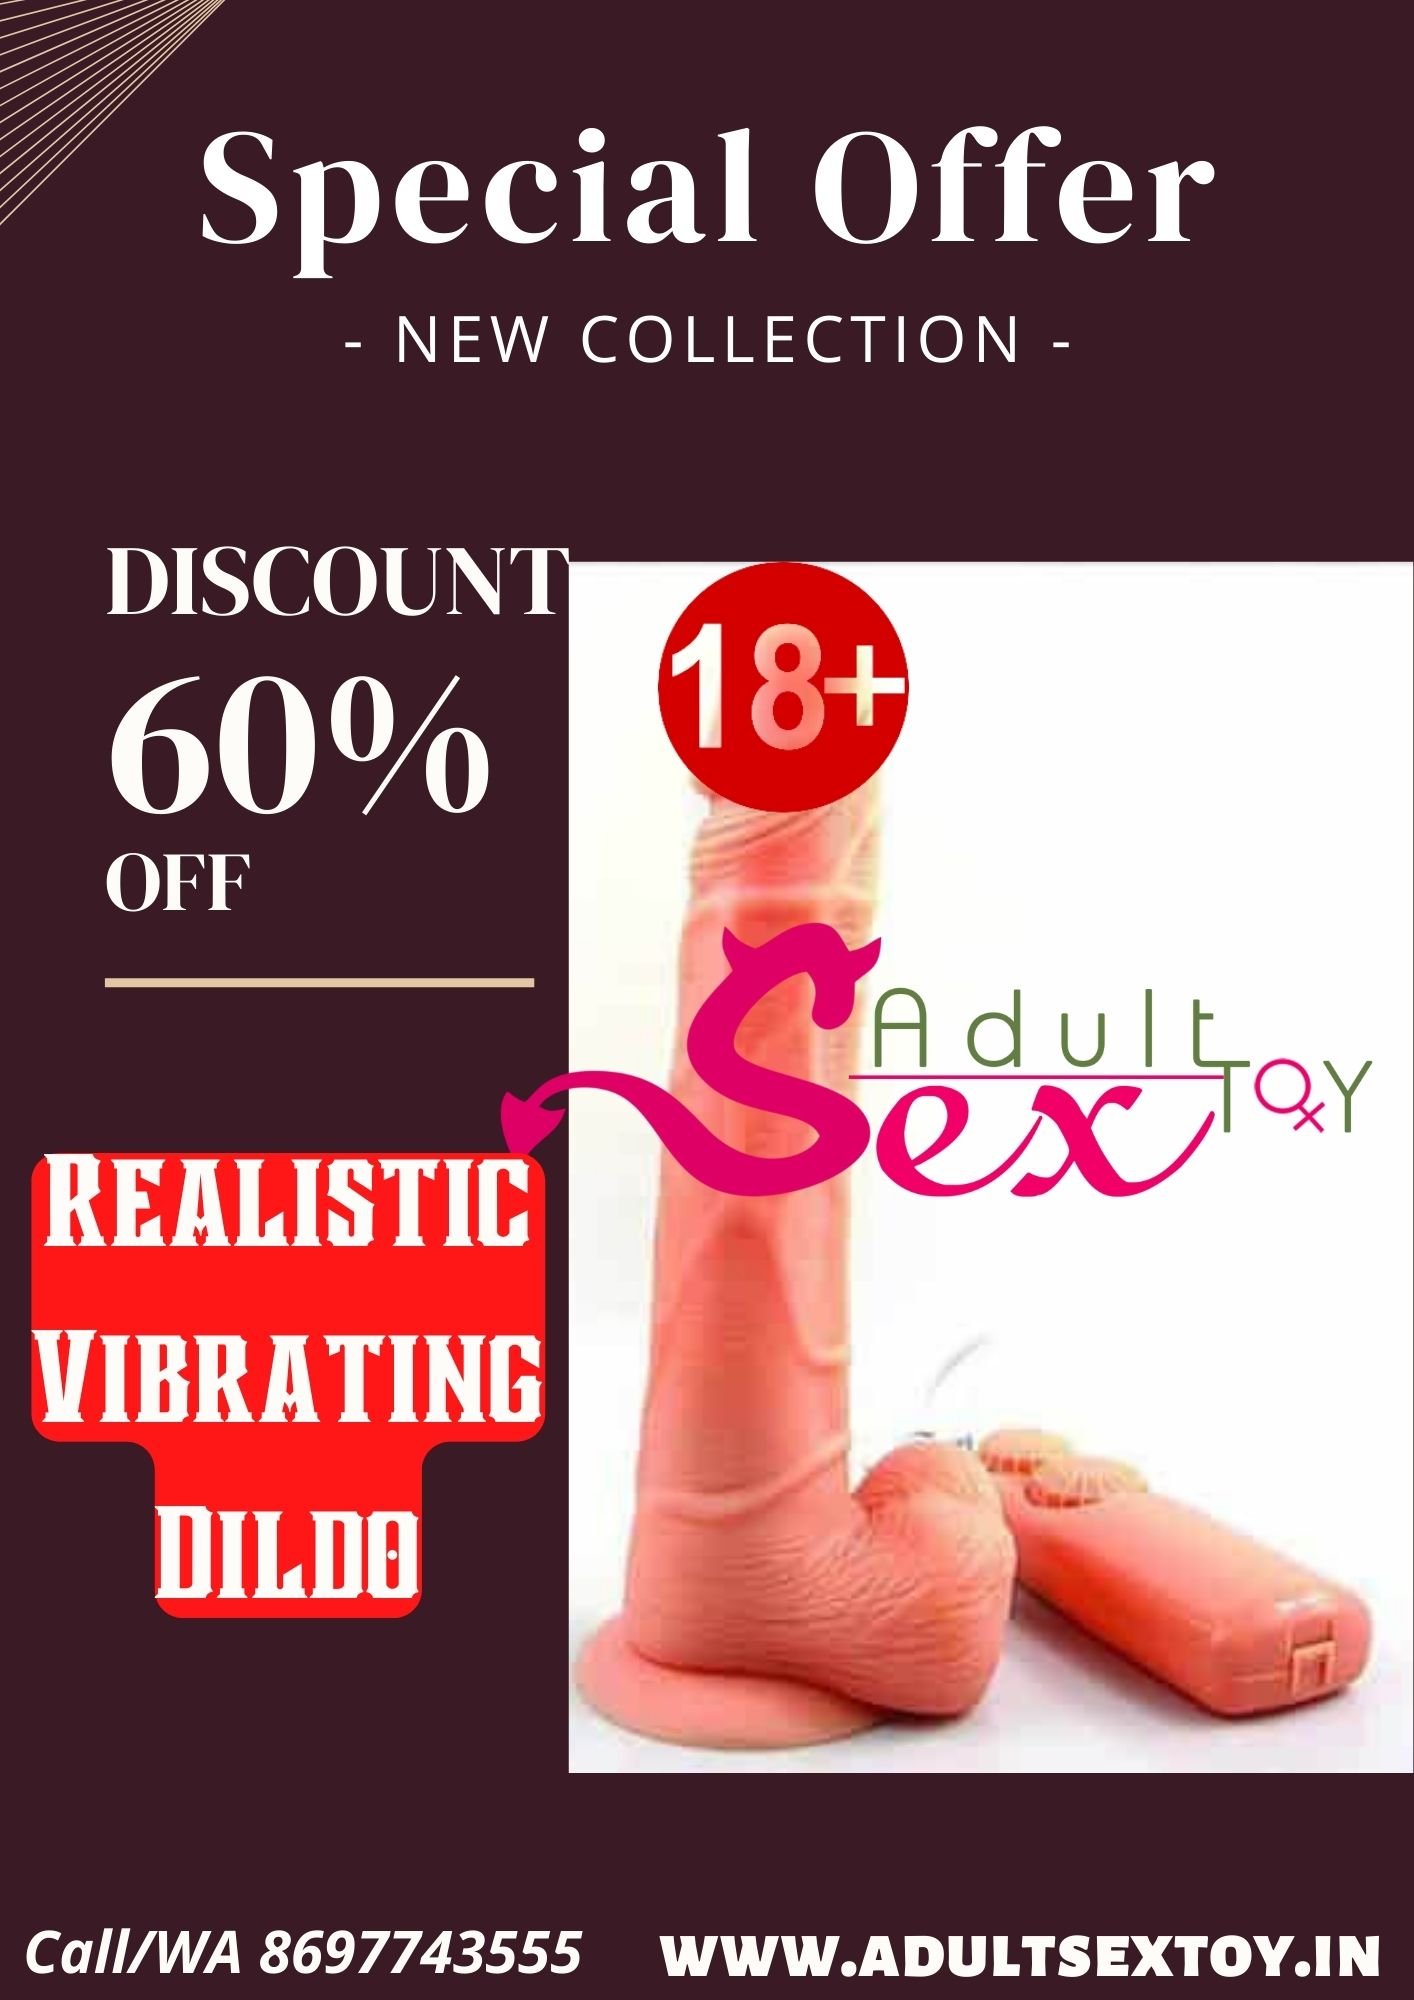 Special Offer | Women Sex Toys | In Mumbai | Call 8697743555,Mumbai,Others,Services,77traders